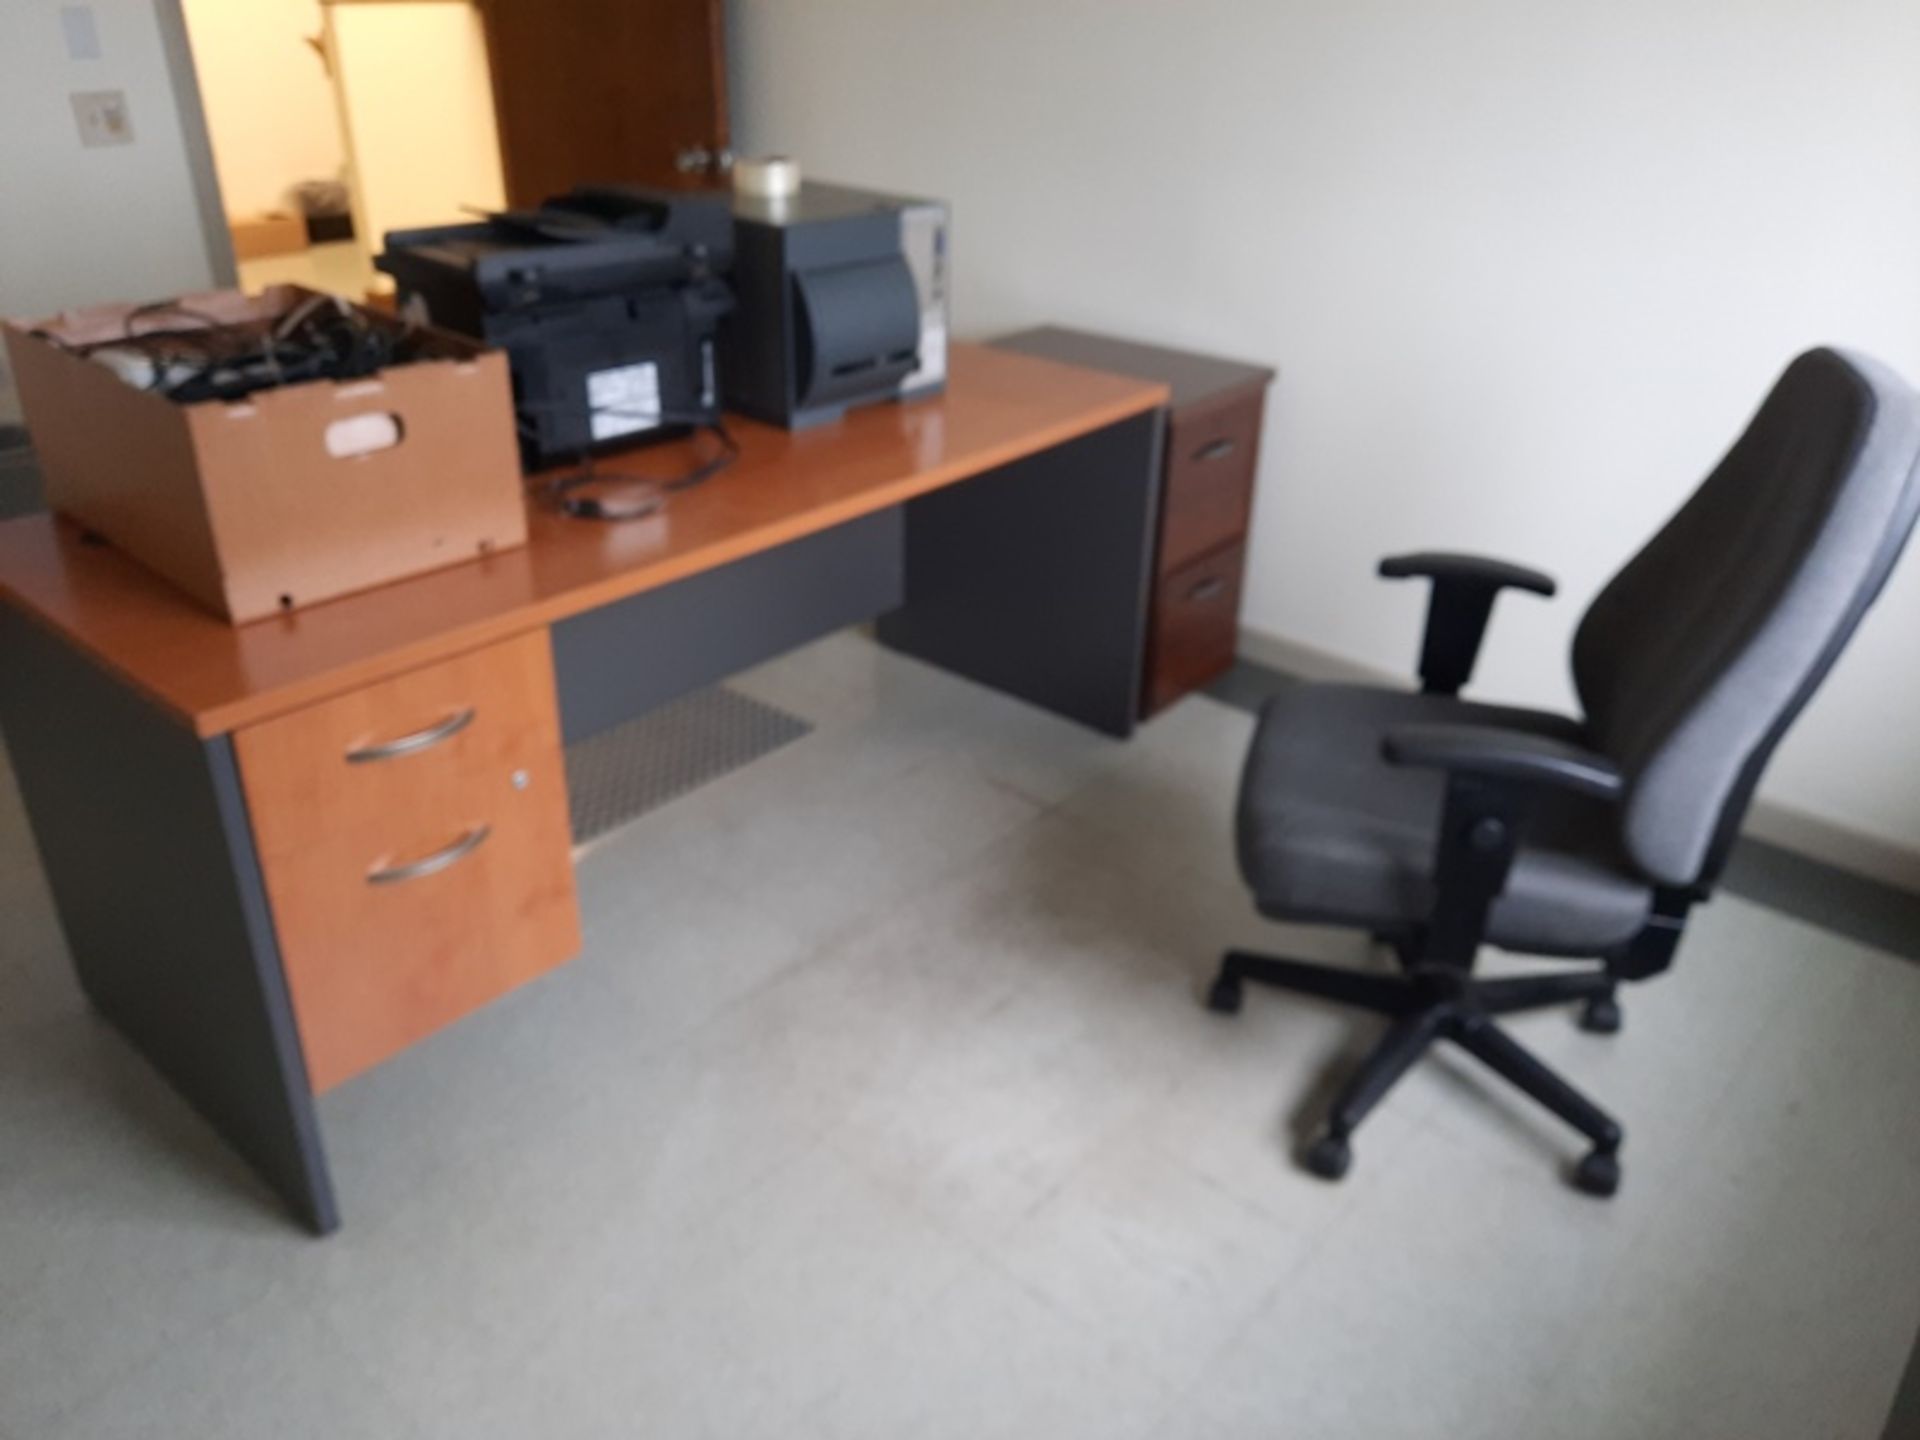 Lot of Office: (1) Desk, Chairs, File Cabinet, Data Max Label Printer, HP Laser Jet, Box of Goodies, - Image 2 of 3